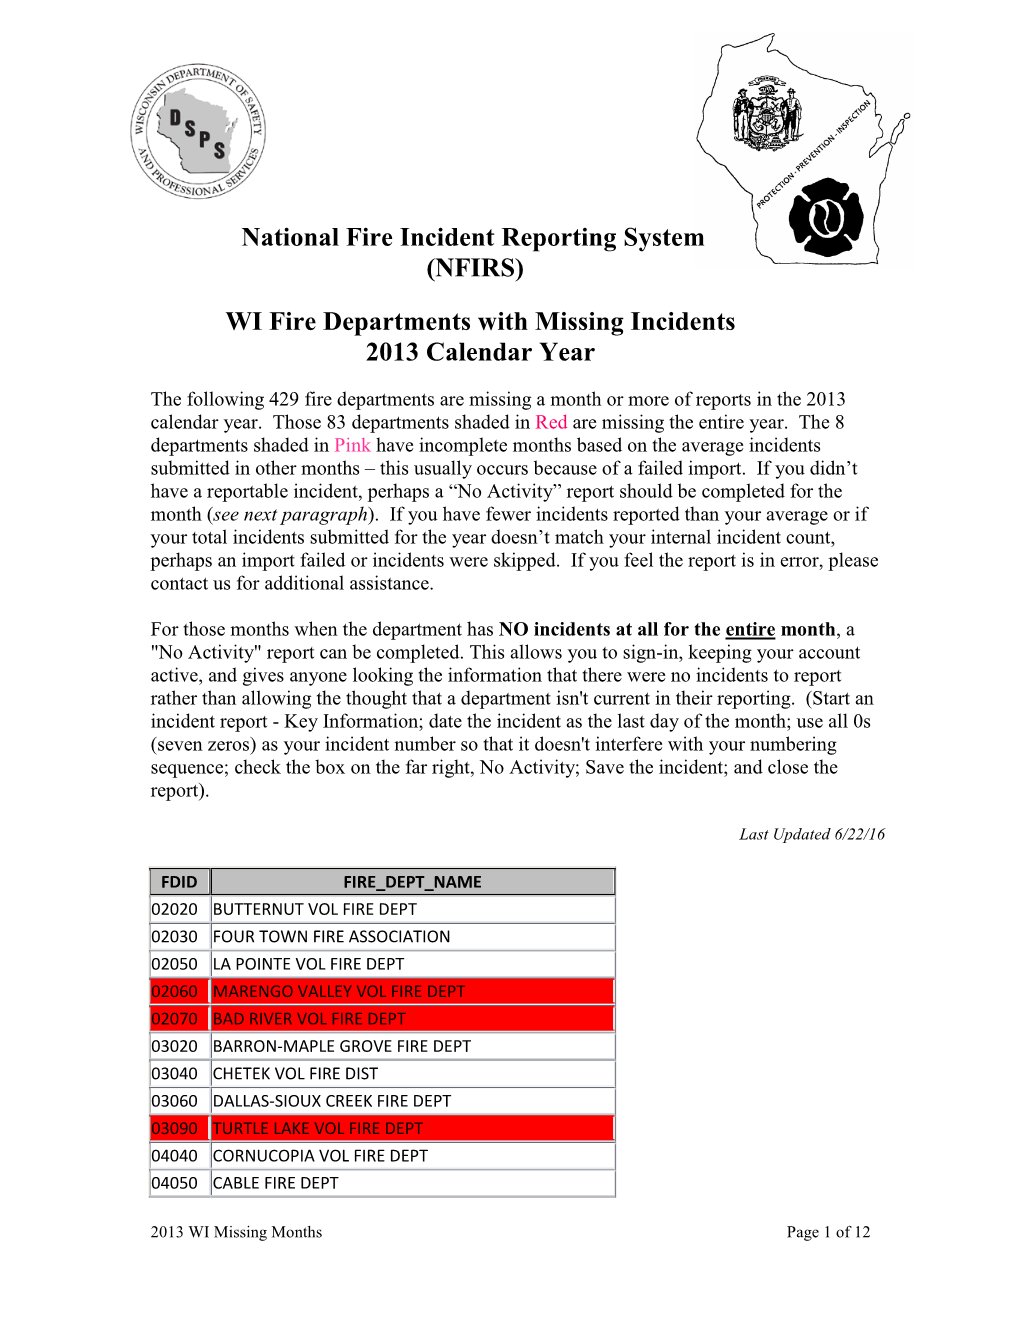 (NFIRS) WI Fire Departments with Missing Incidents 2013 Calendar